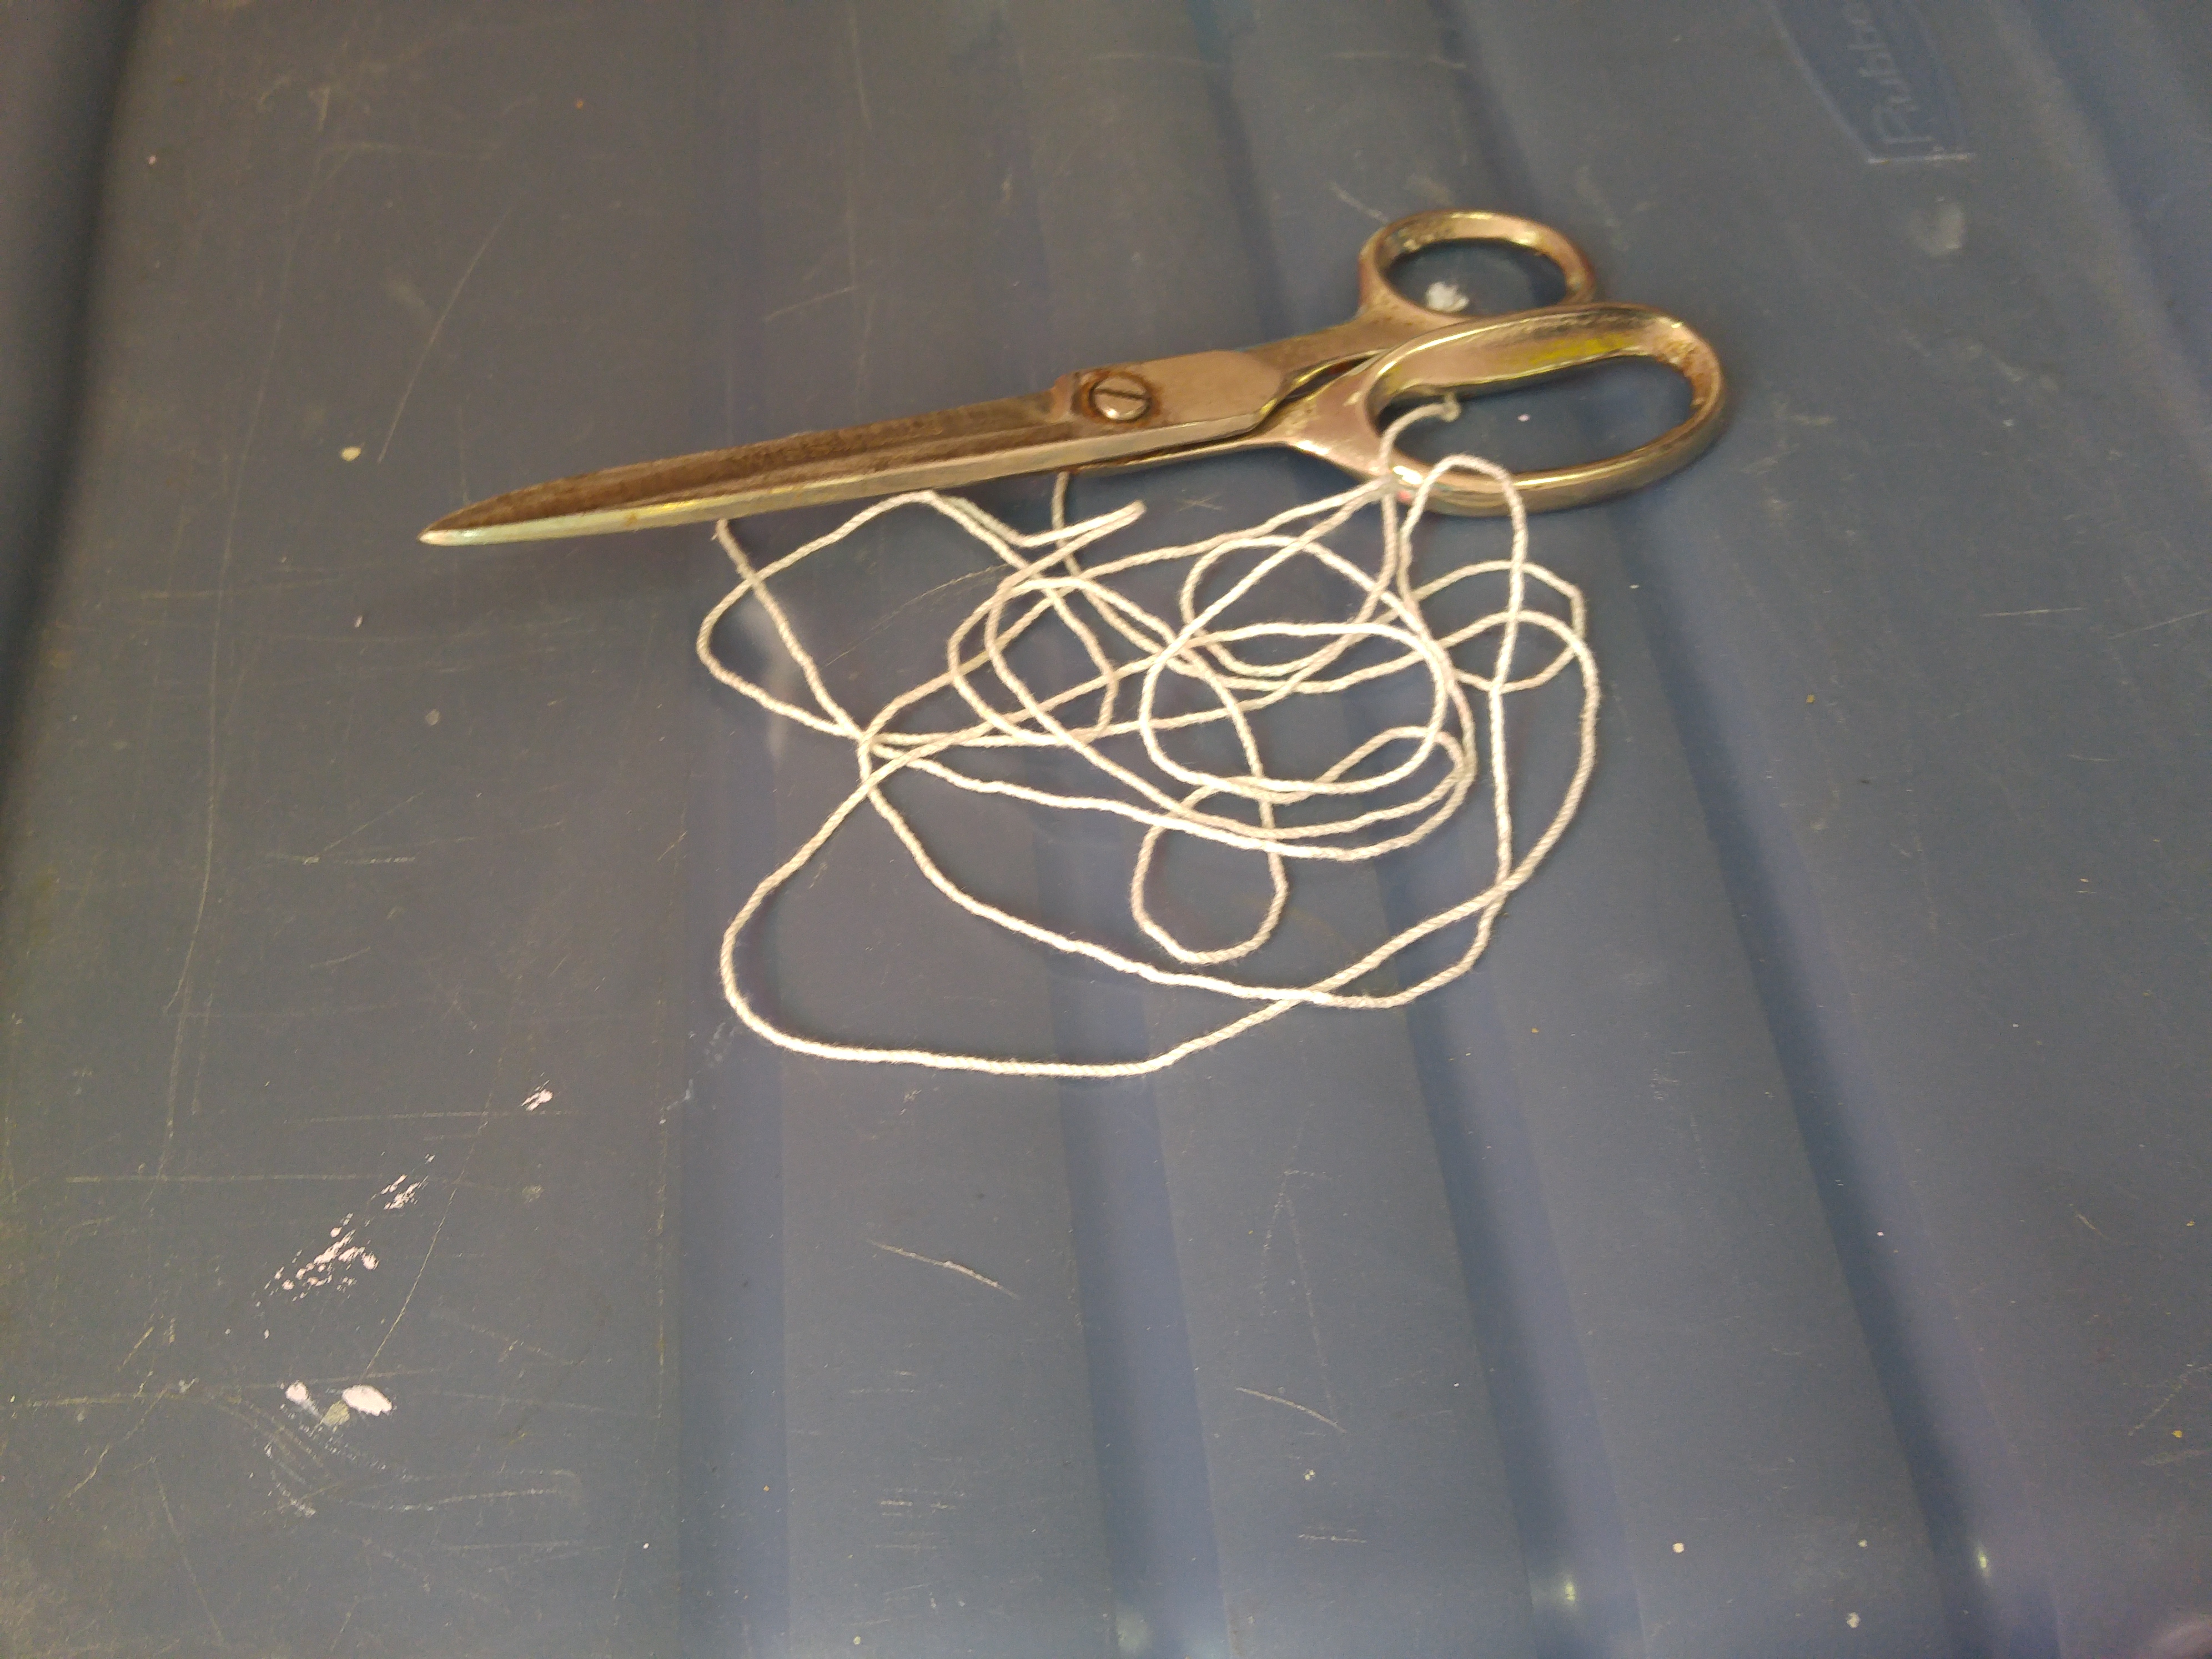 A tangle of string, sitting beside a pair of scissors, just on a plastic bin.